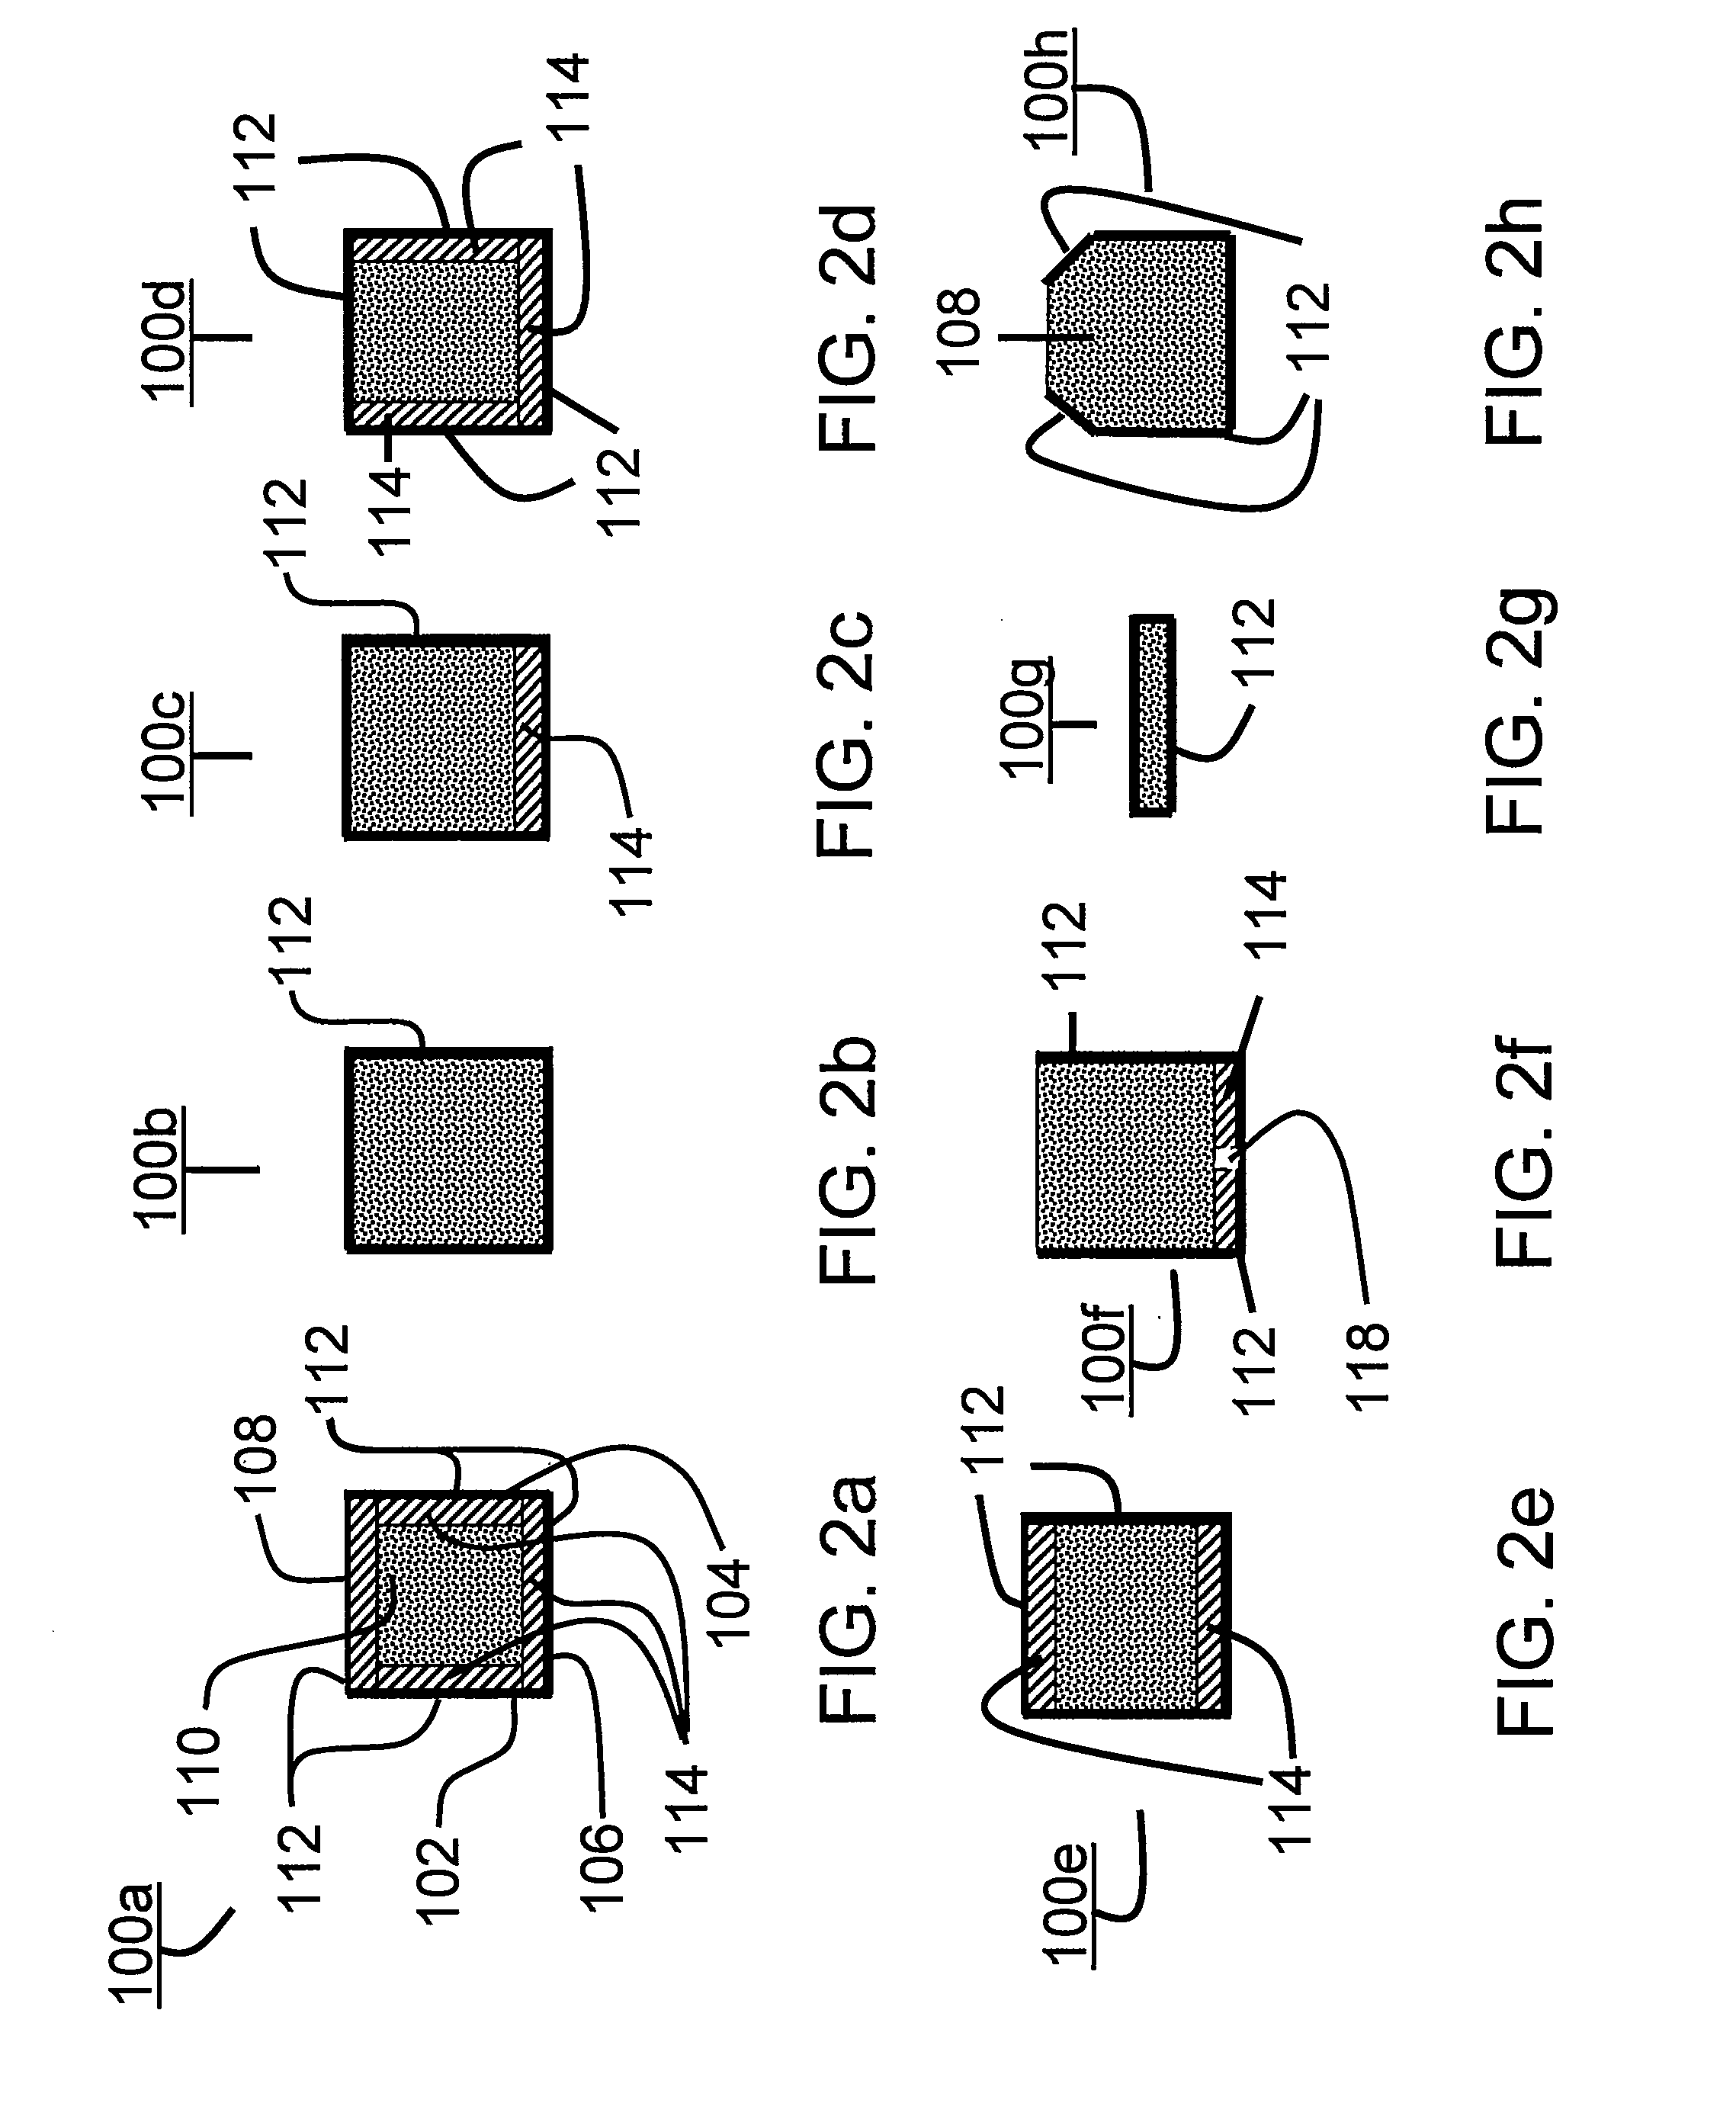 Encapsulated composit fibrous aerogel spacer assembly